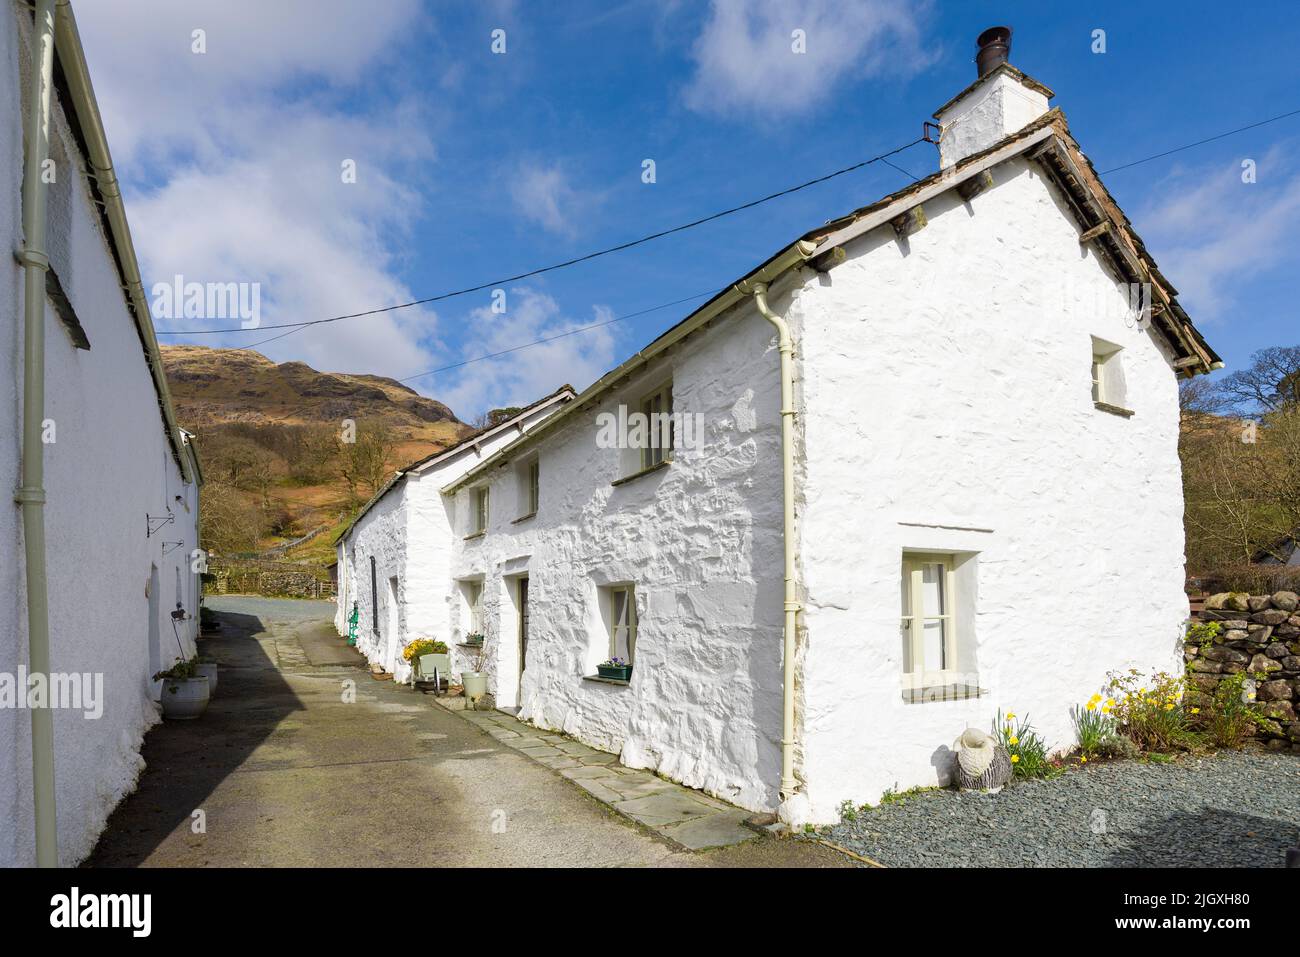 Cottages in the hamlet of Seatoller in the Lake District National Park, Cumbria, England. Stock Photo